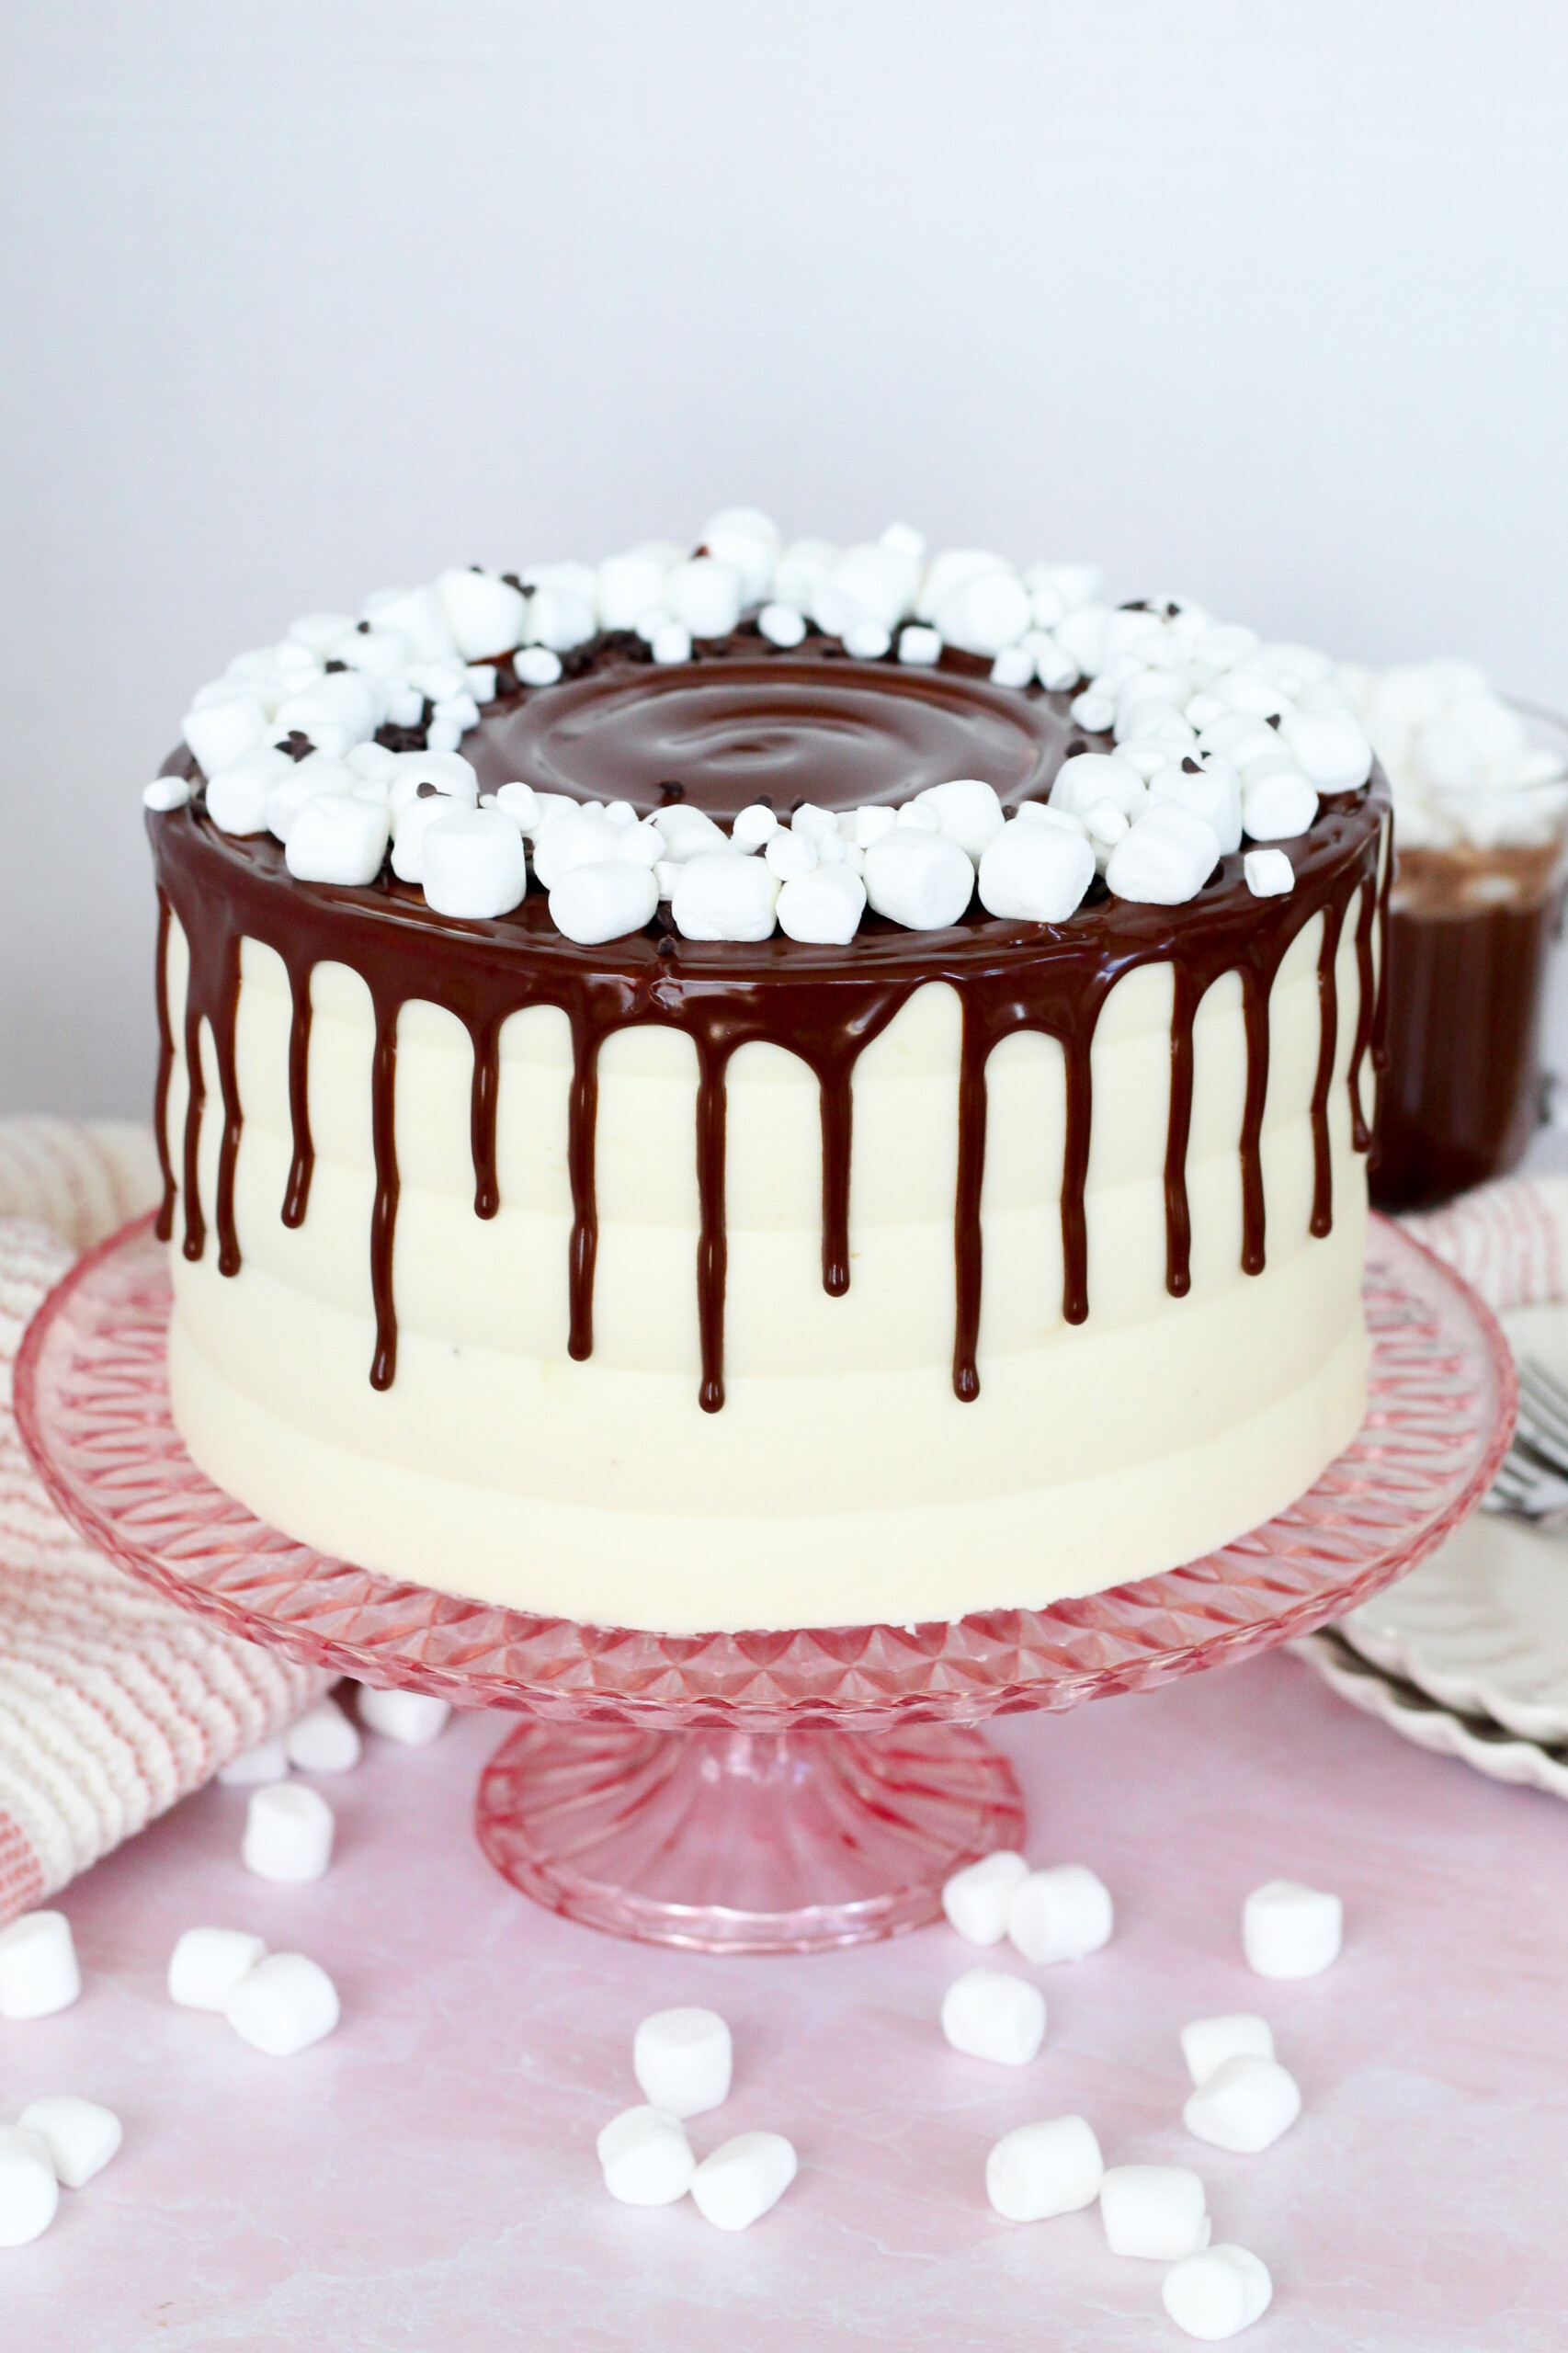 Hot Chocolate Cake with Marshmallow Buttercream - Cake by Courtney